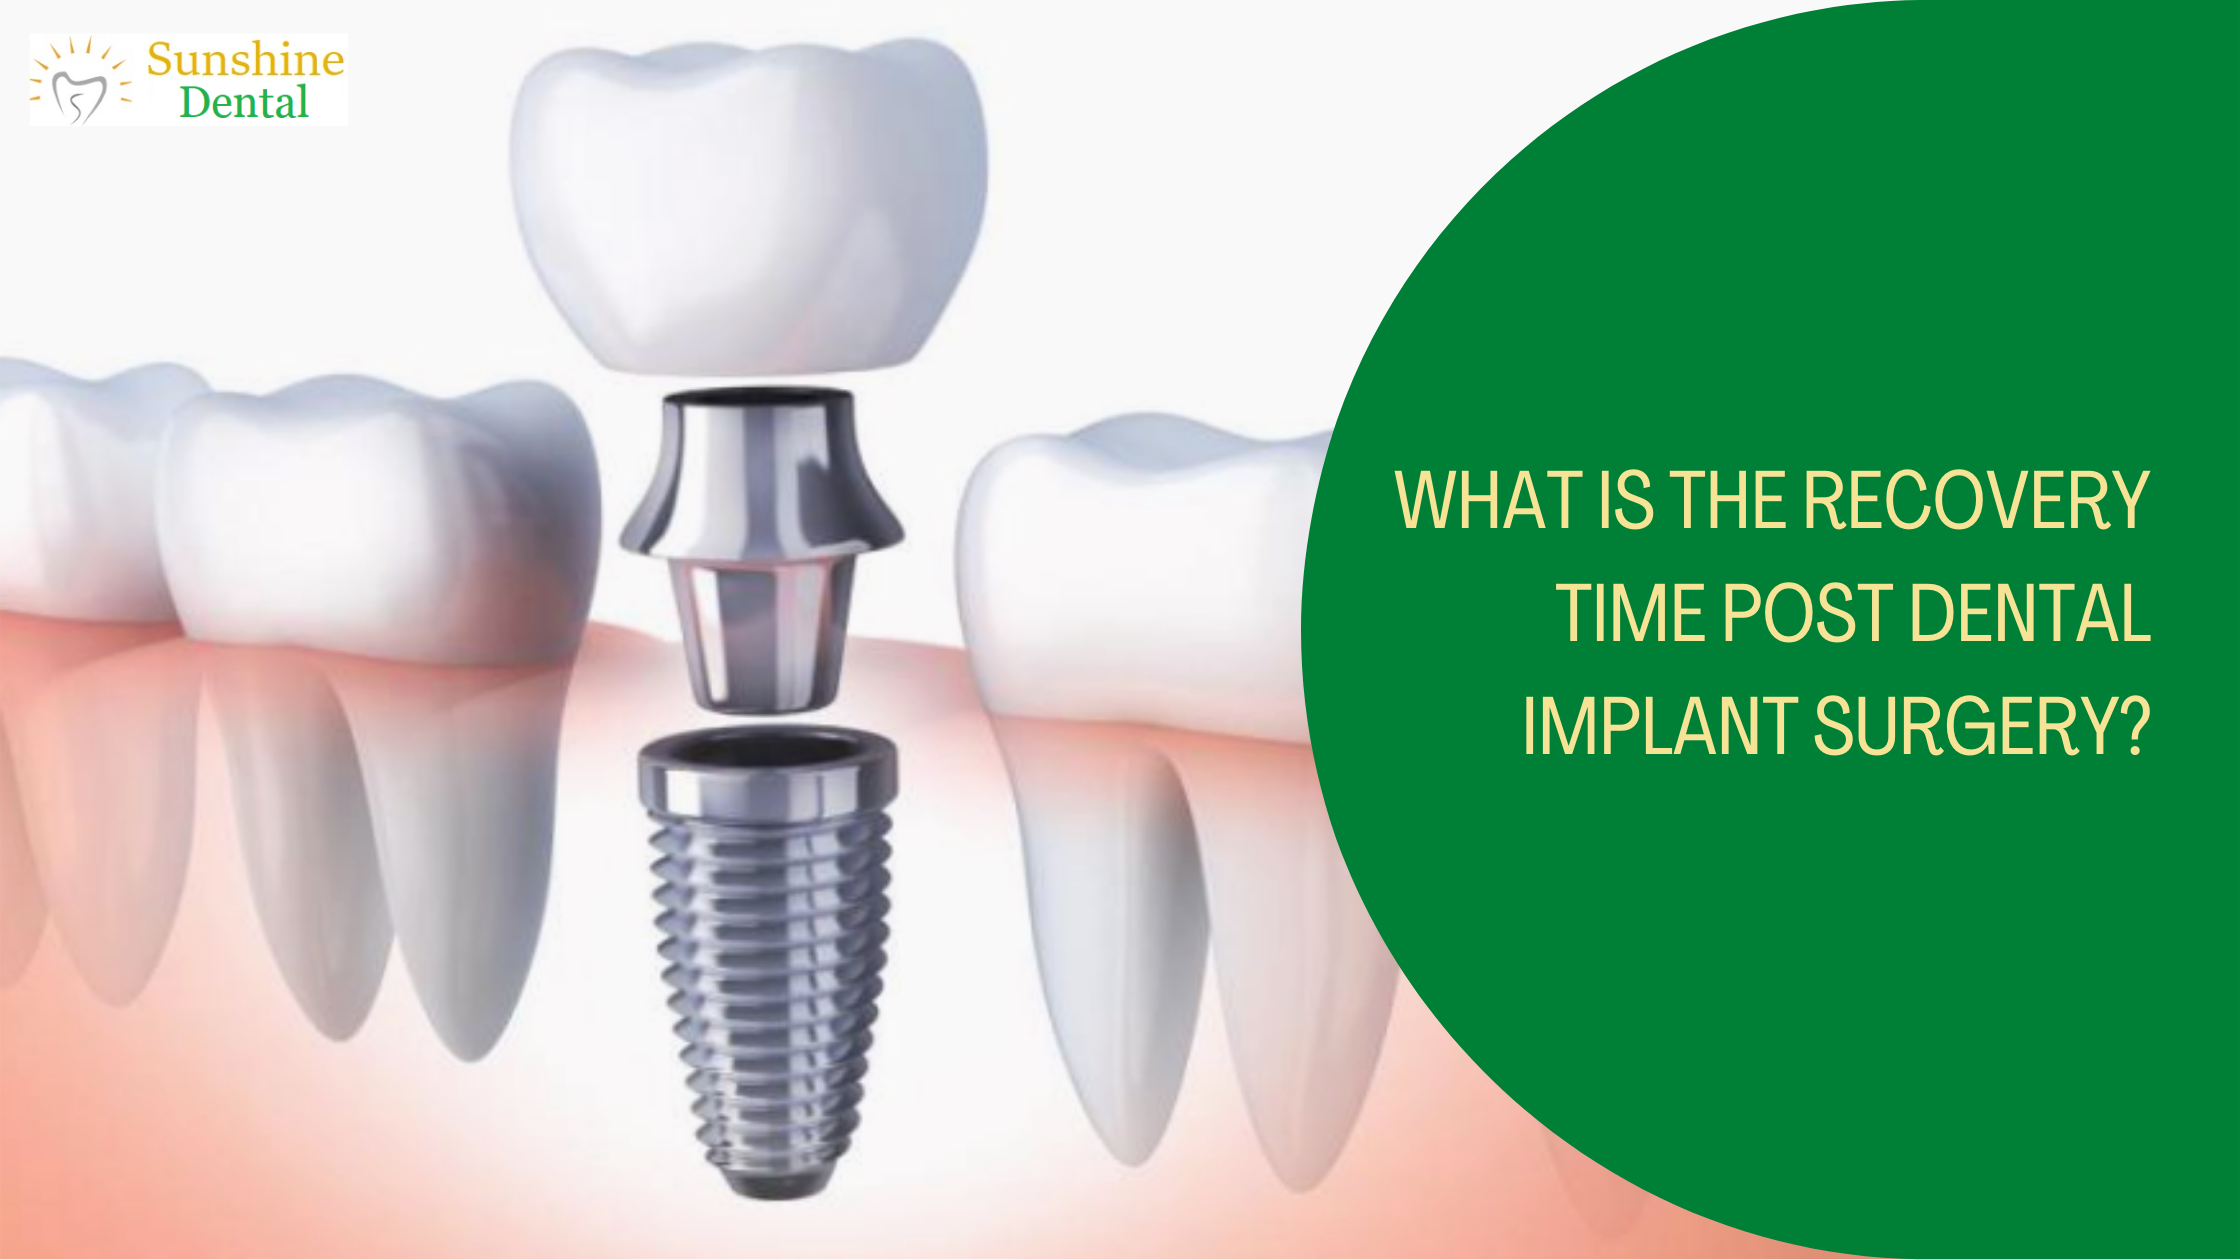 Recovery time post dental implant surgery, Best Dental Implants in Bangalore